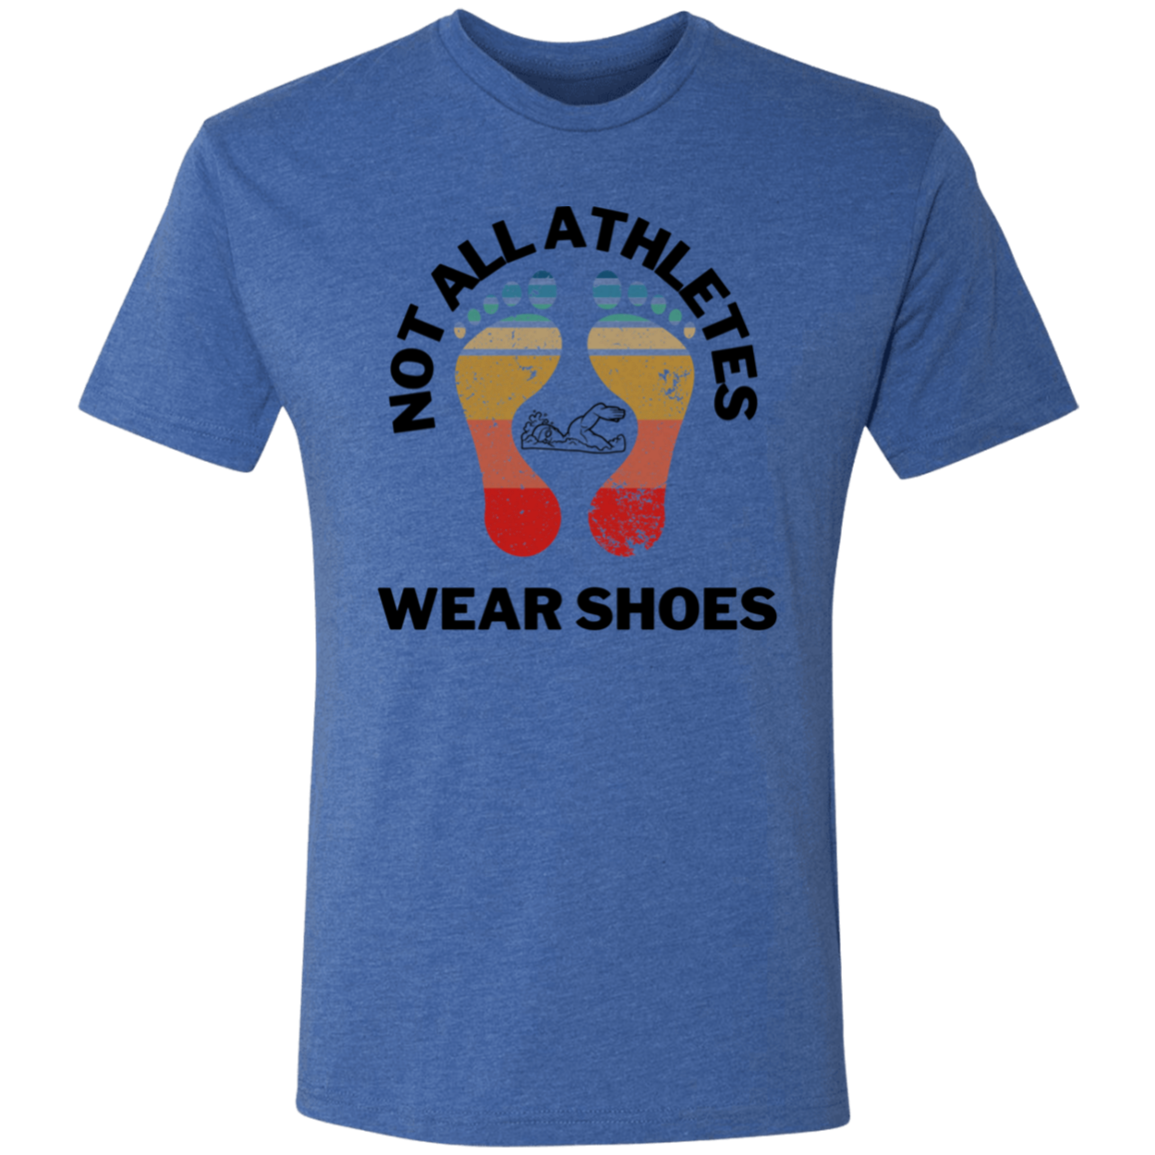 Not All Athletes Wear Shoes- Men's Triblend T-Shirt